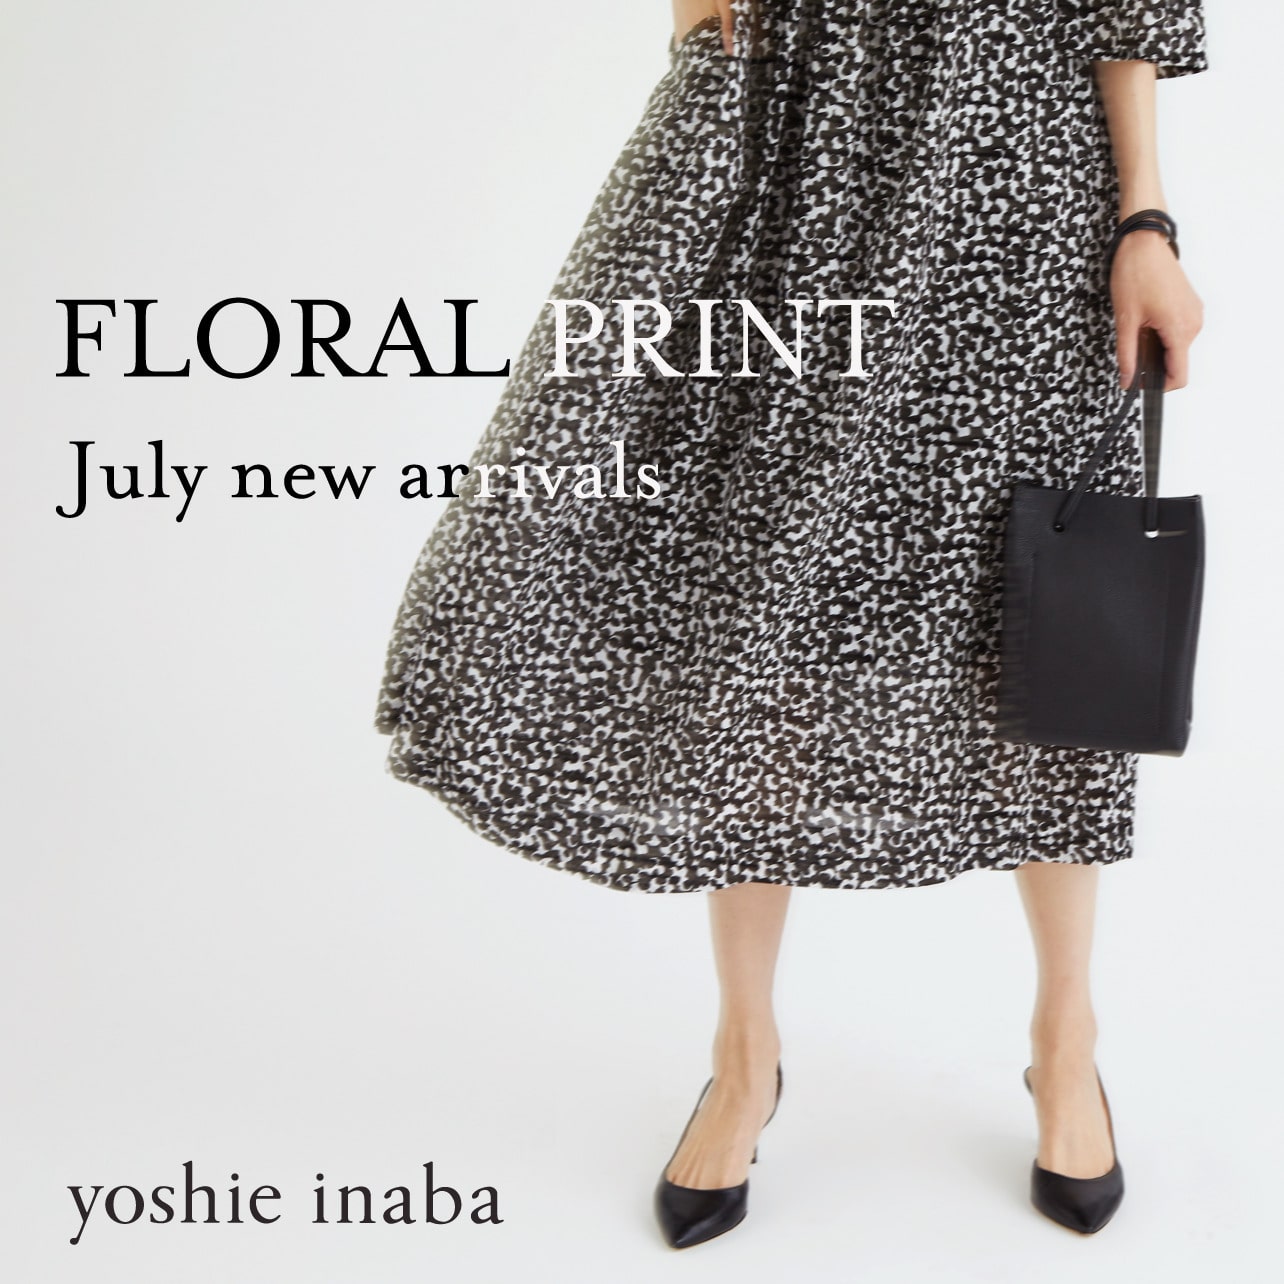 July new arrivals